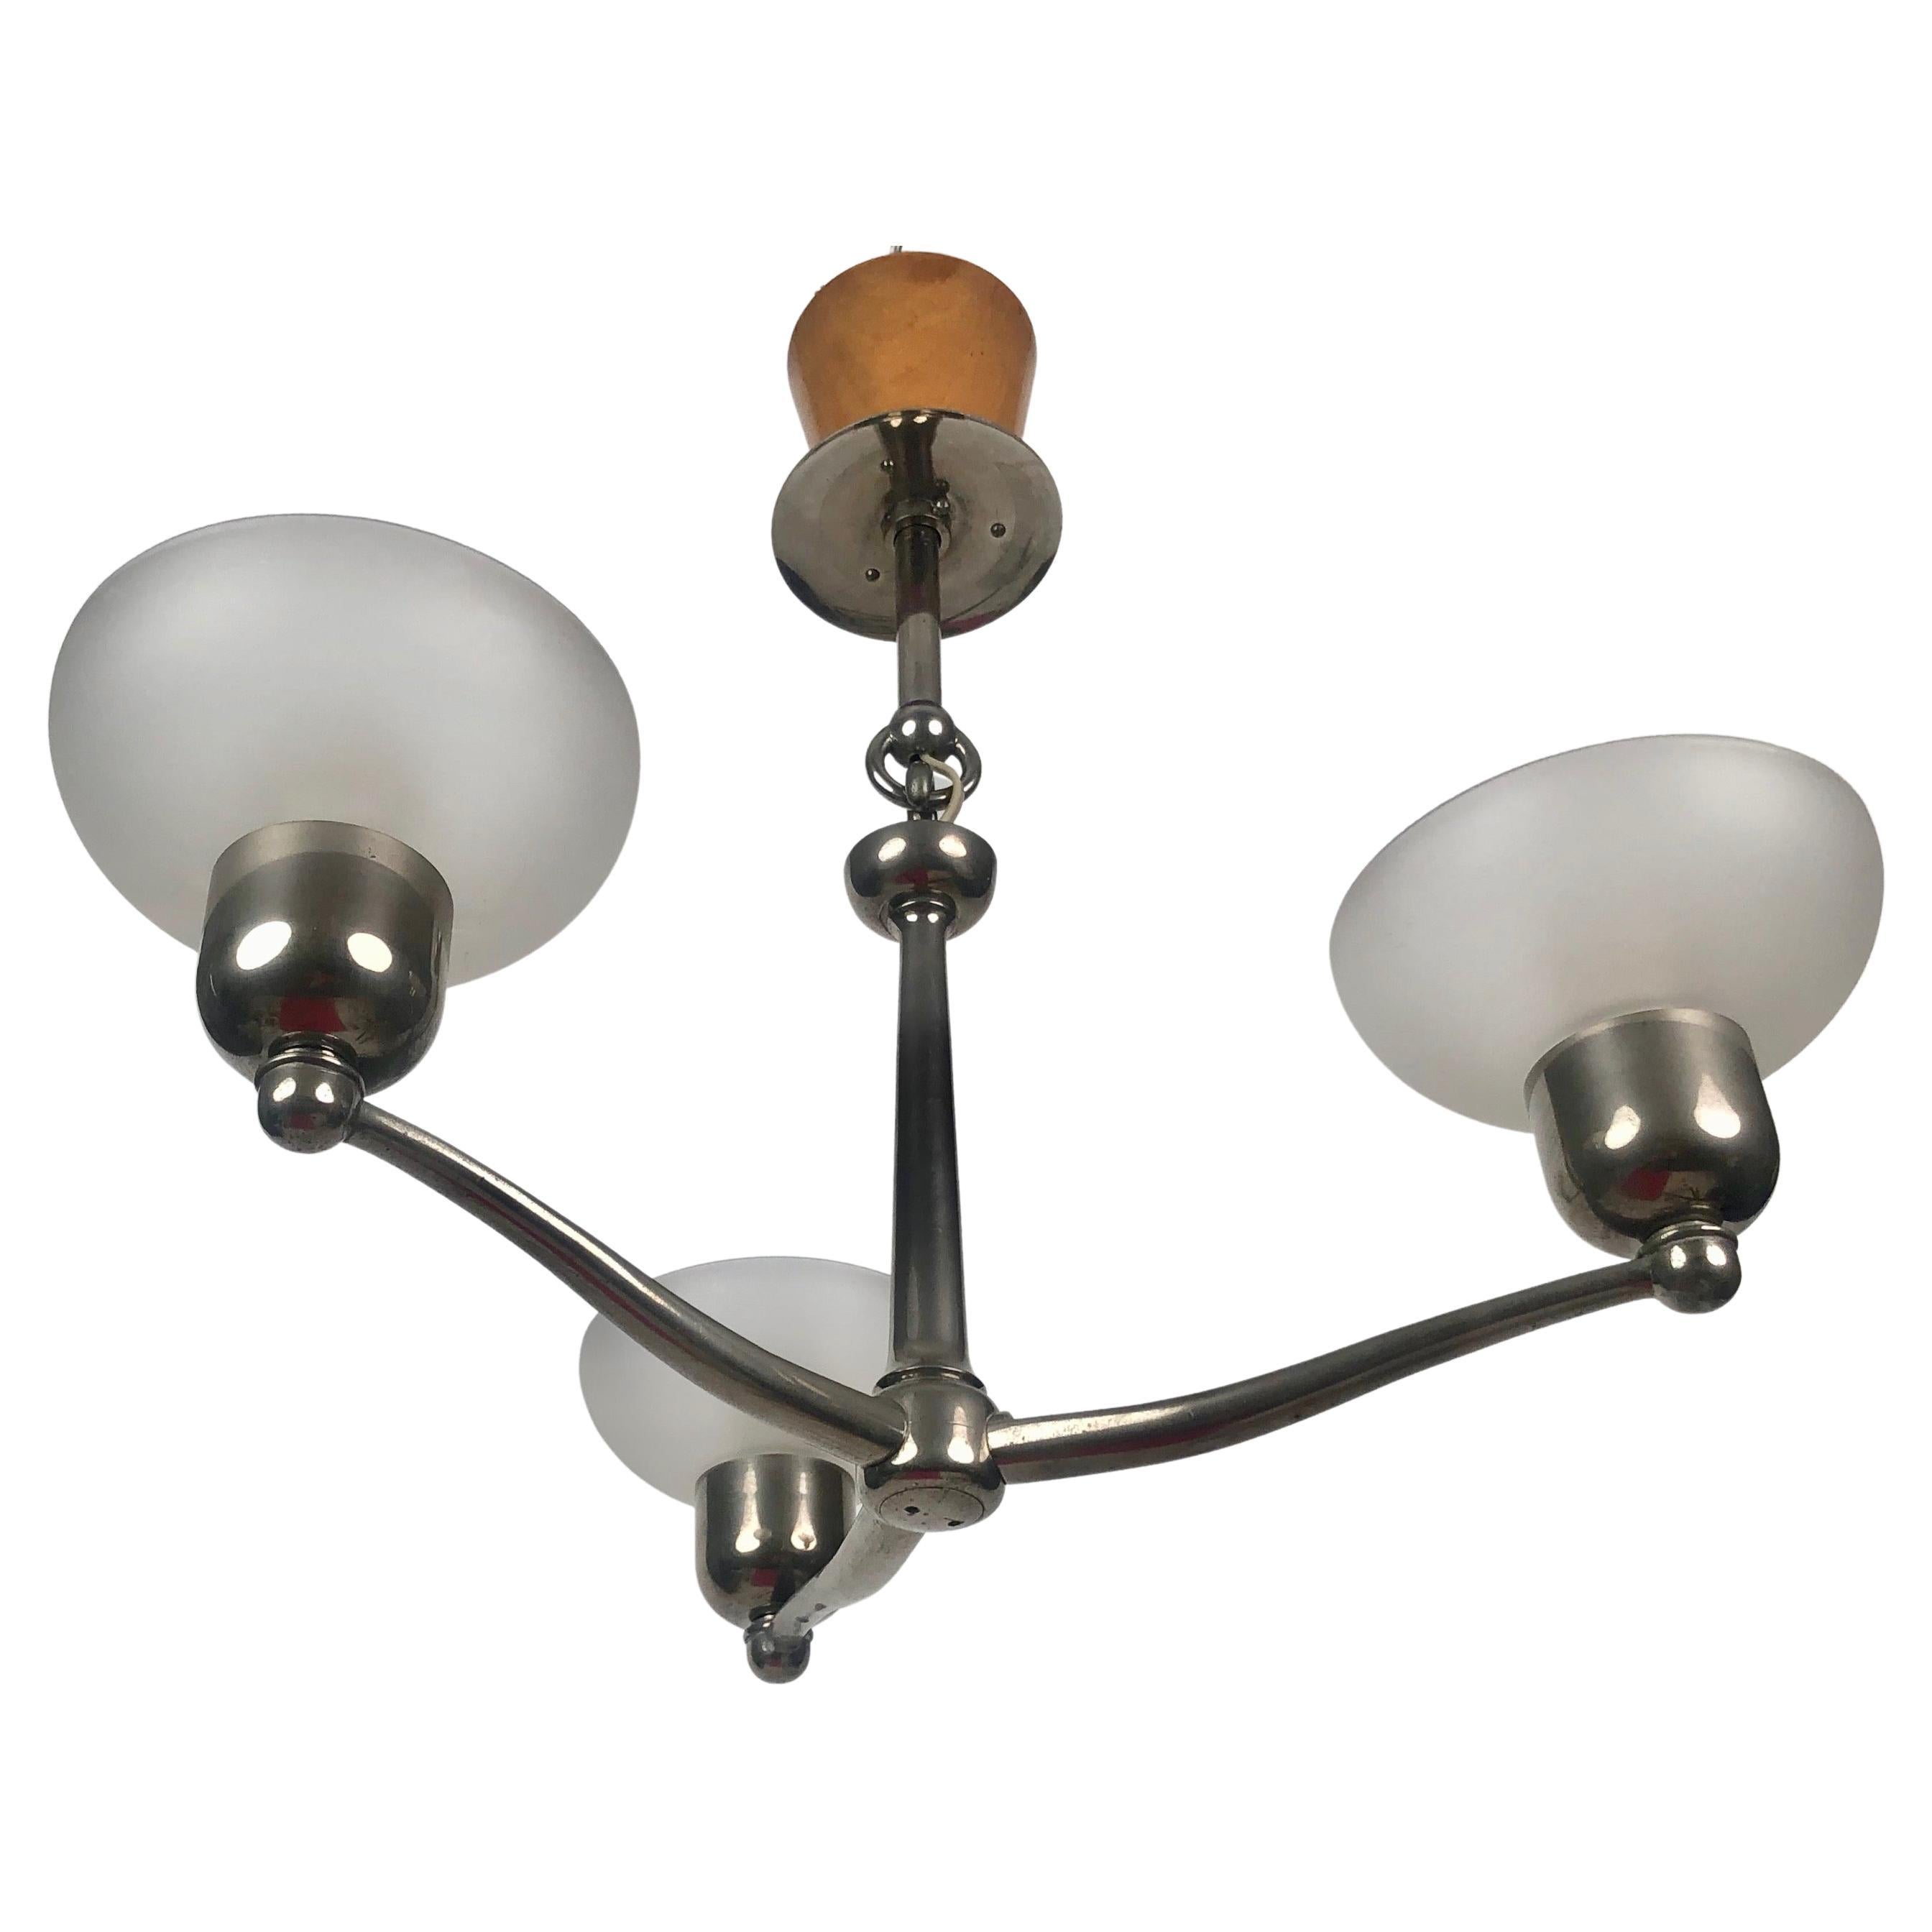 Rare Functionalist Pendant Light from the 1930's, Austria For Sale